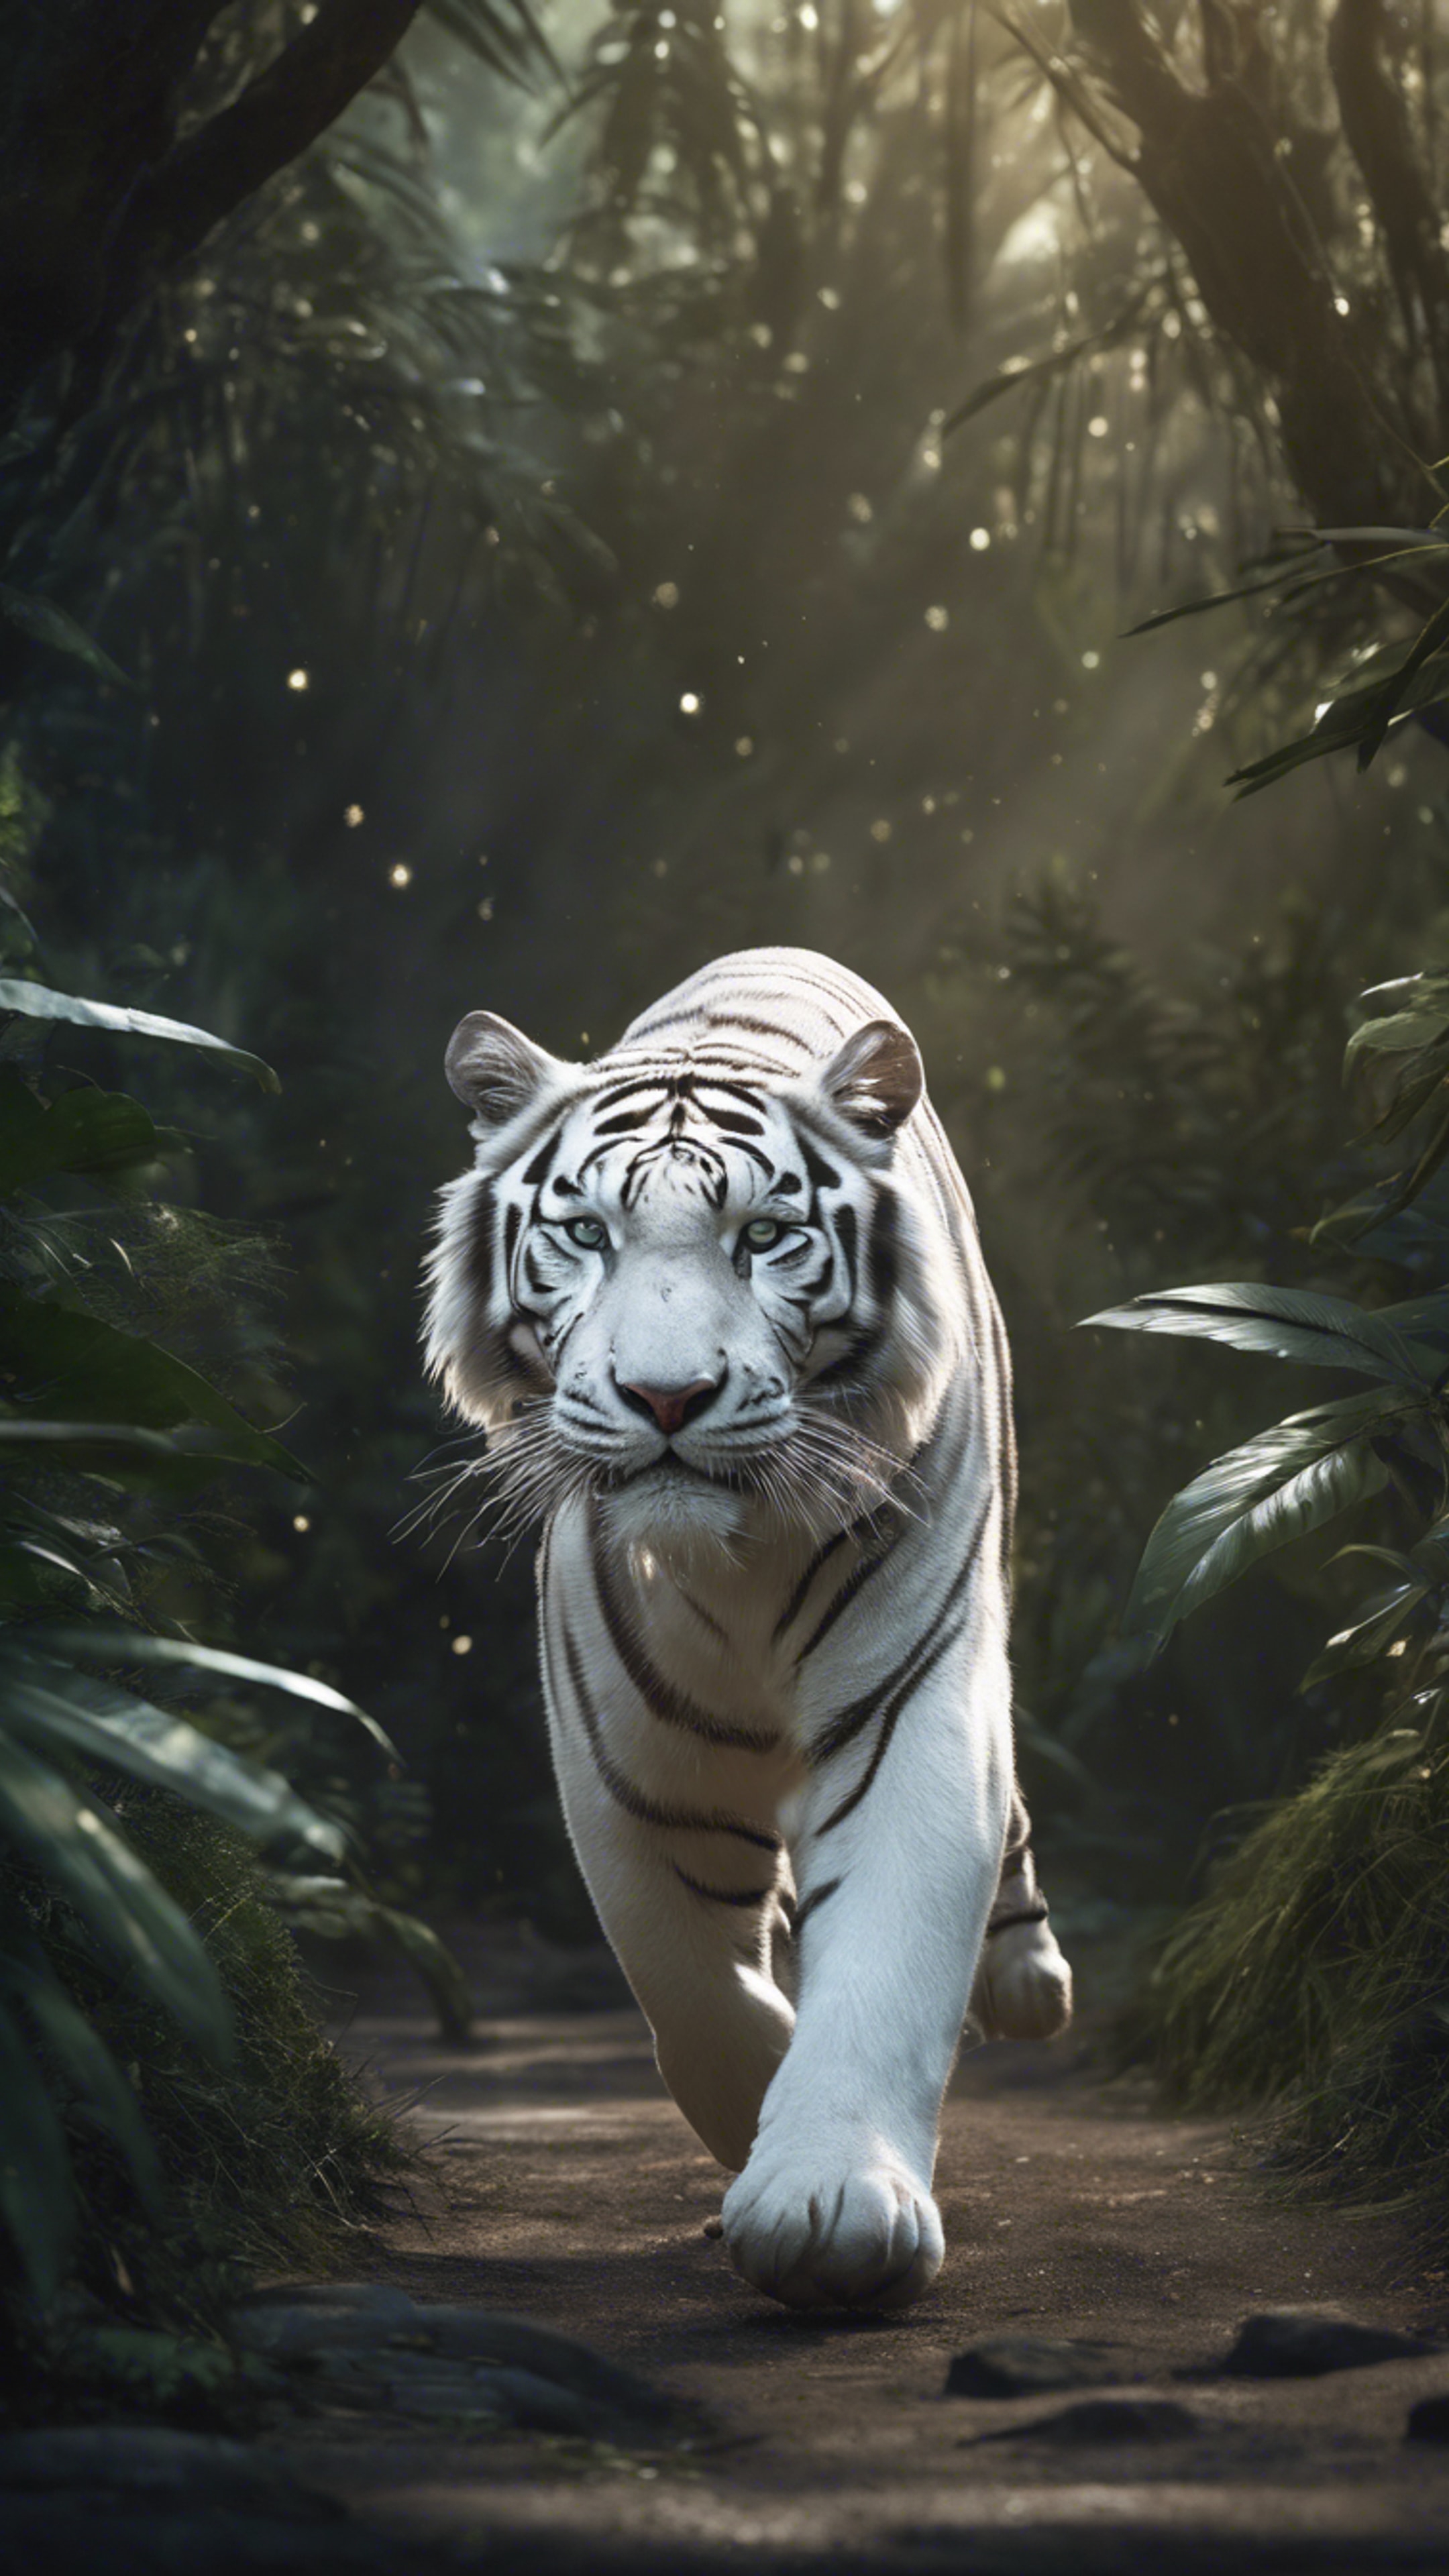 A cool white tiger, with silver stripes, strides powerfully through a moonlit jungle. Hintergrund[5d9925a4be334da199e0]